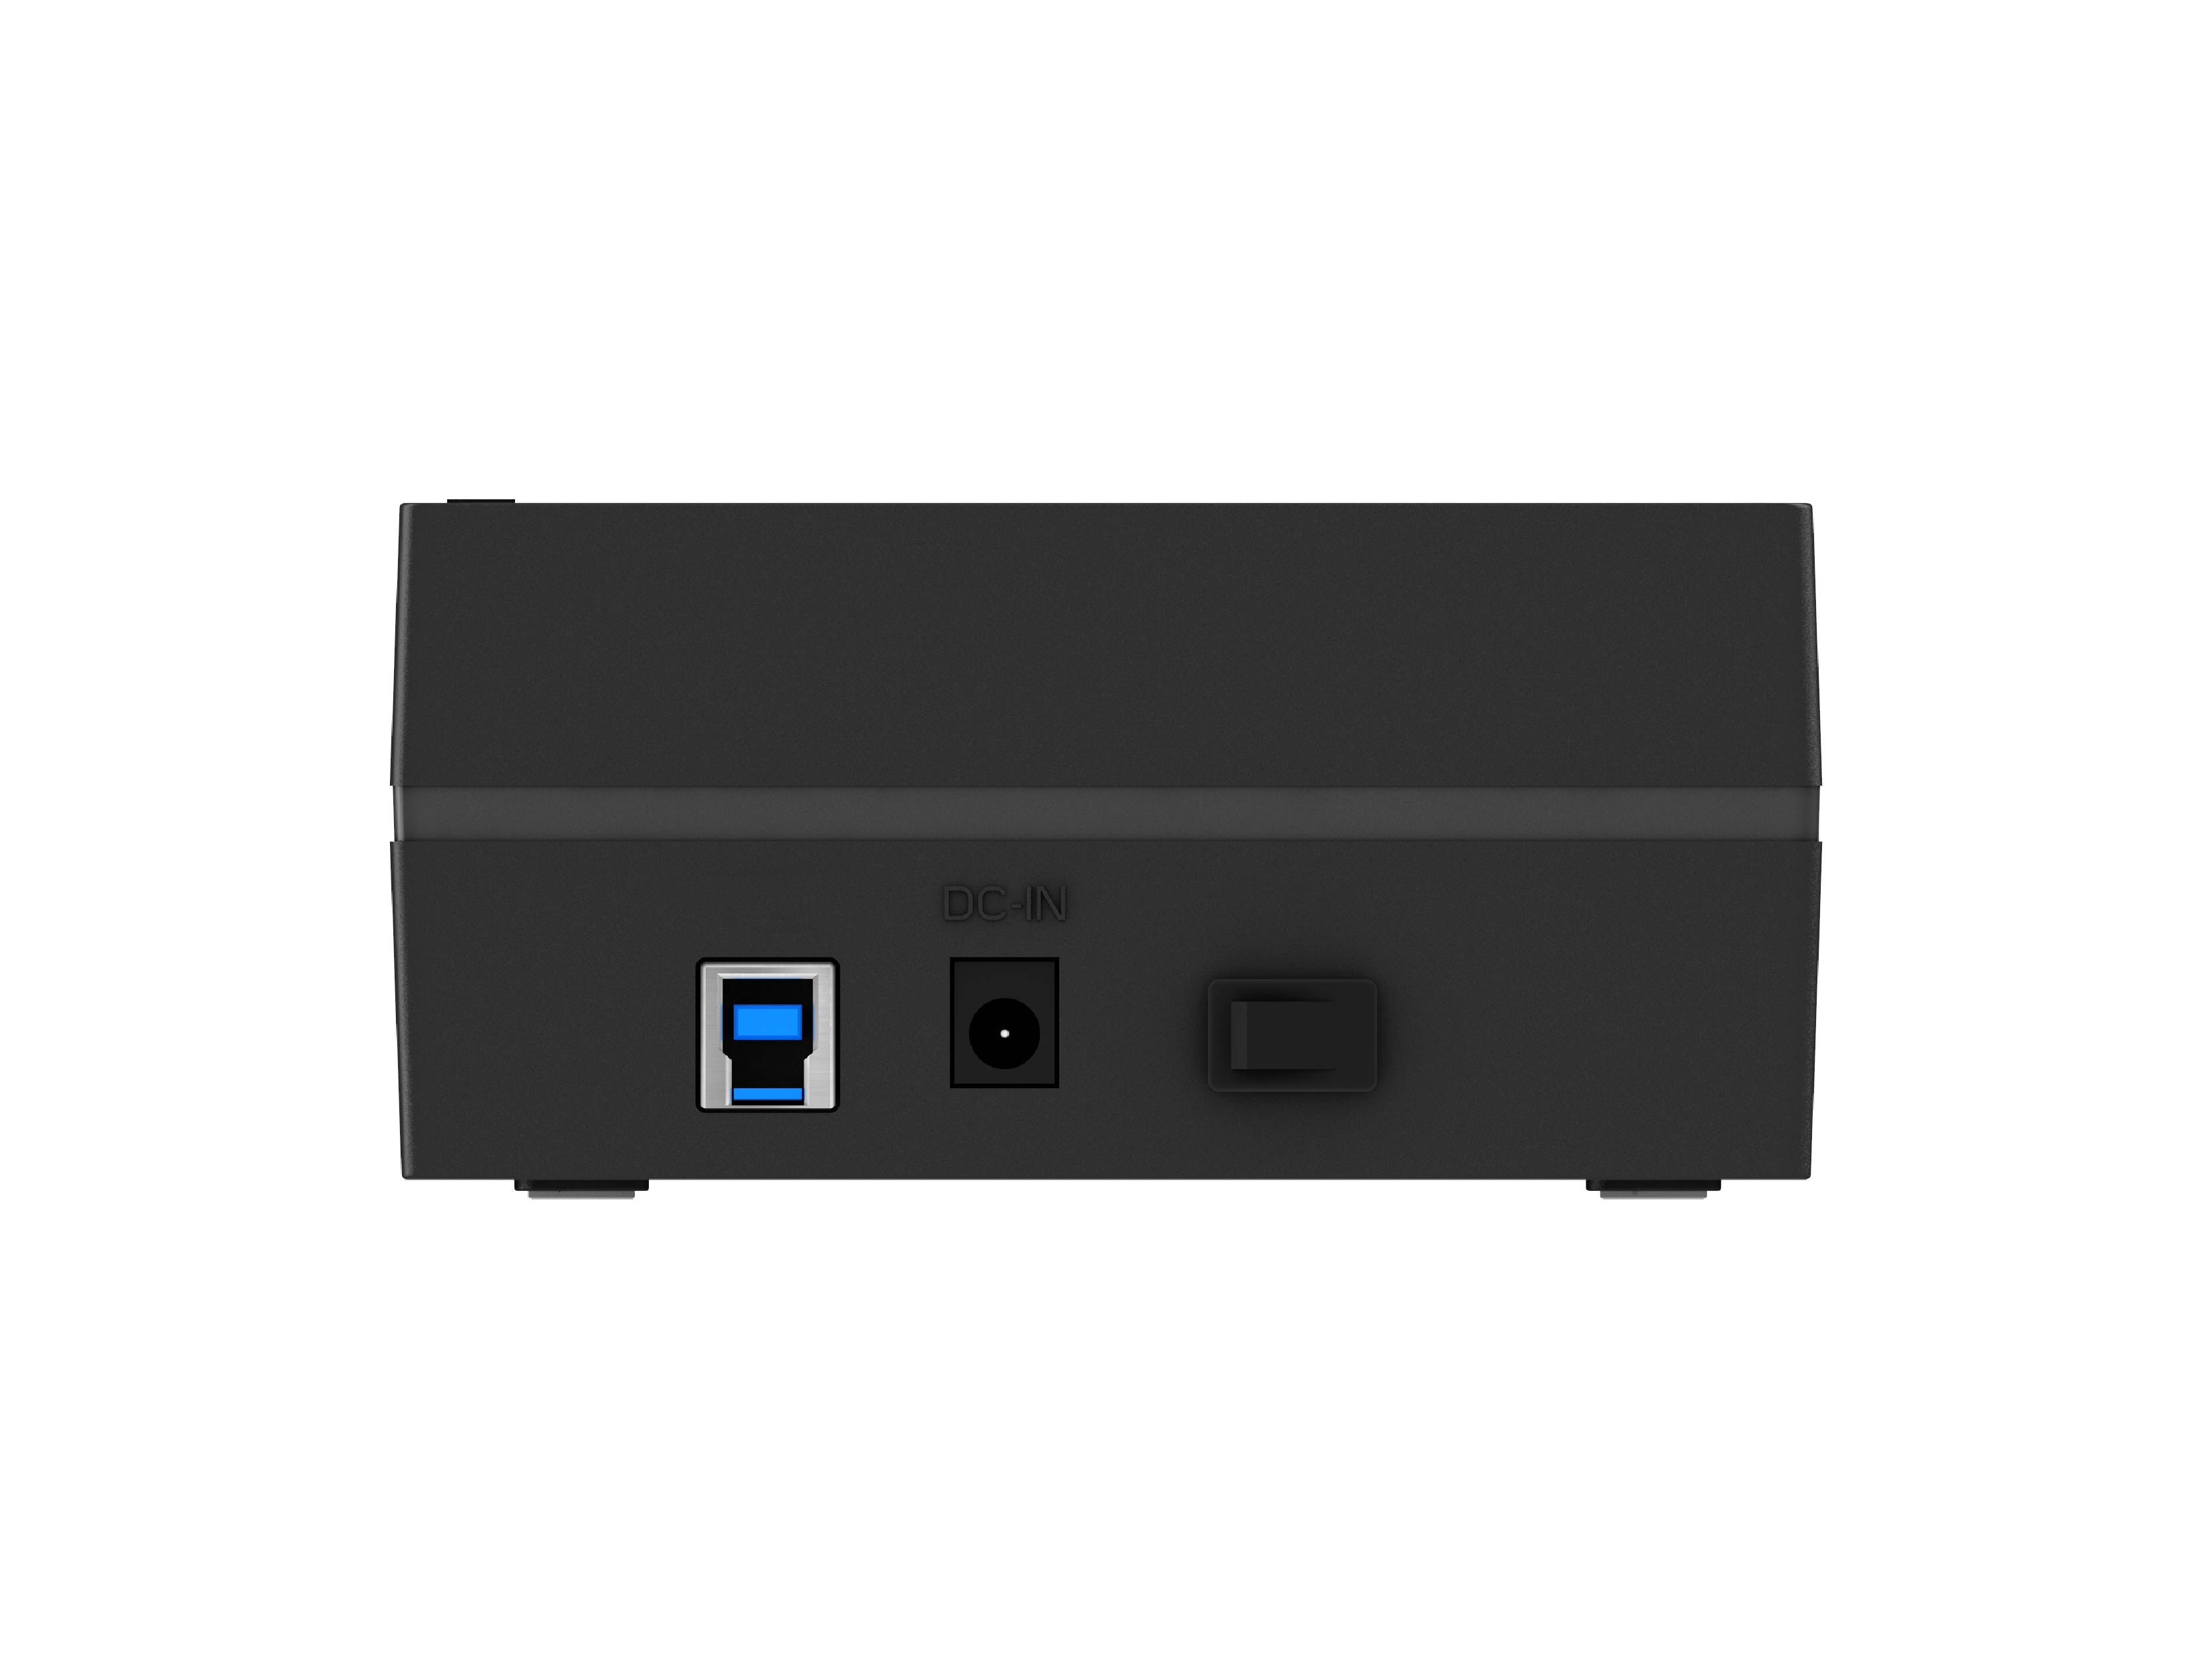 3 Bay SATA SSD/HDD Dock (SI-133US31C), Applicable with 3x 3.5" or 2.5" SATA HDD/SSD 6Gbps, USB3.2-C to host, independent power control of hard disk.